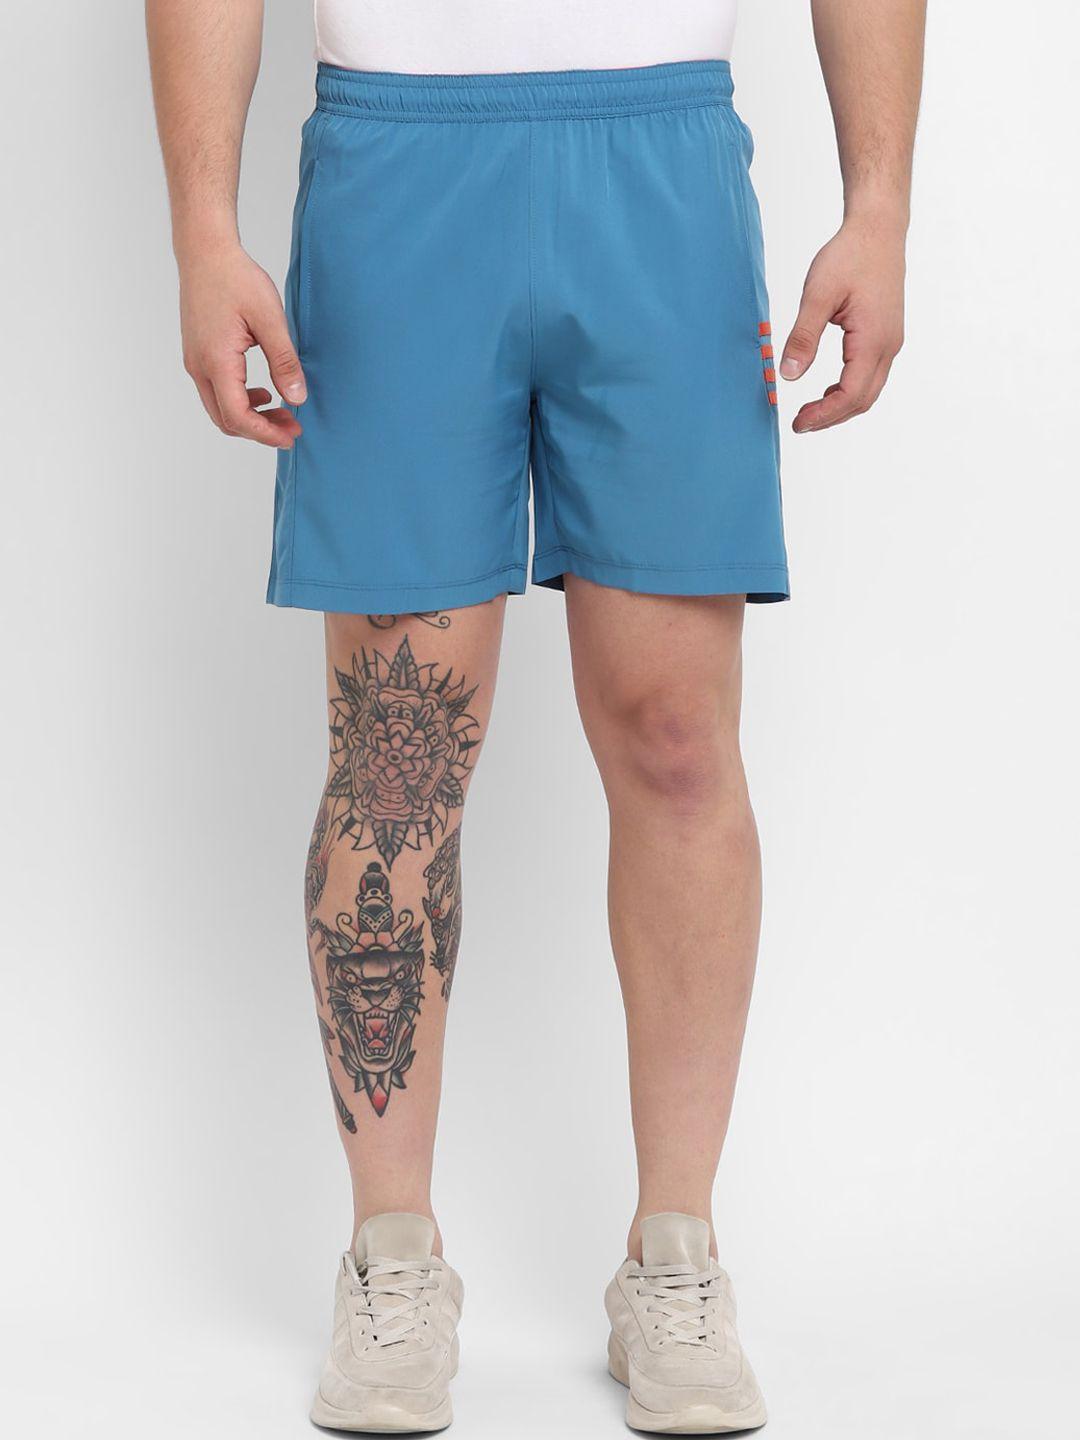 off limits men sports shorts with antimicrobial technology